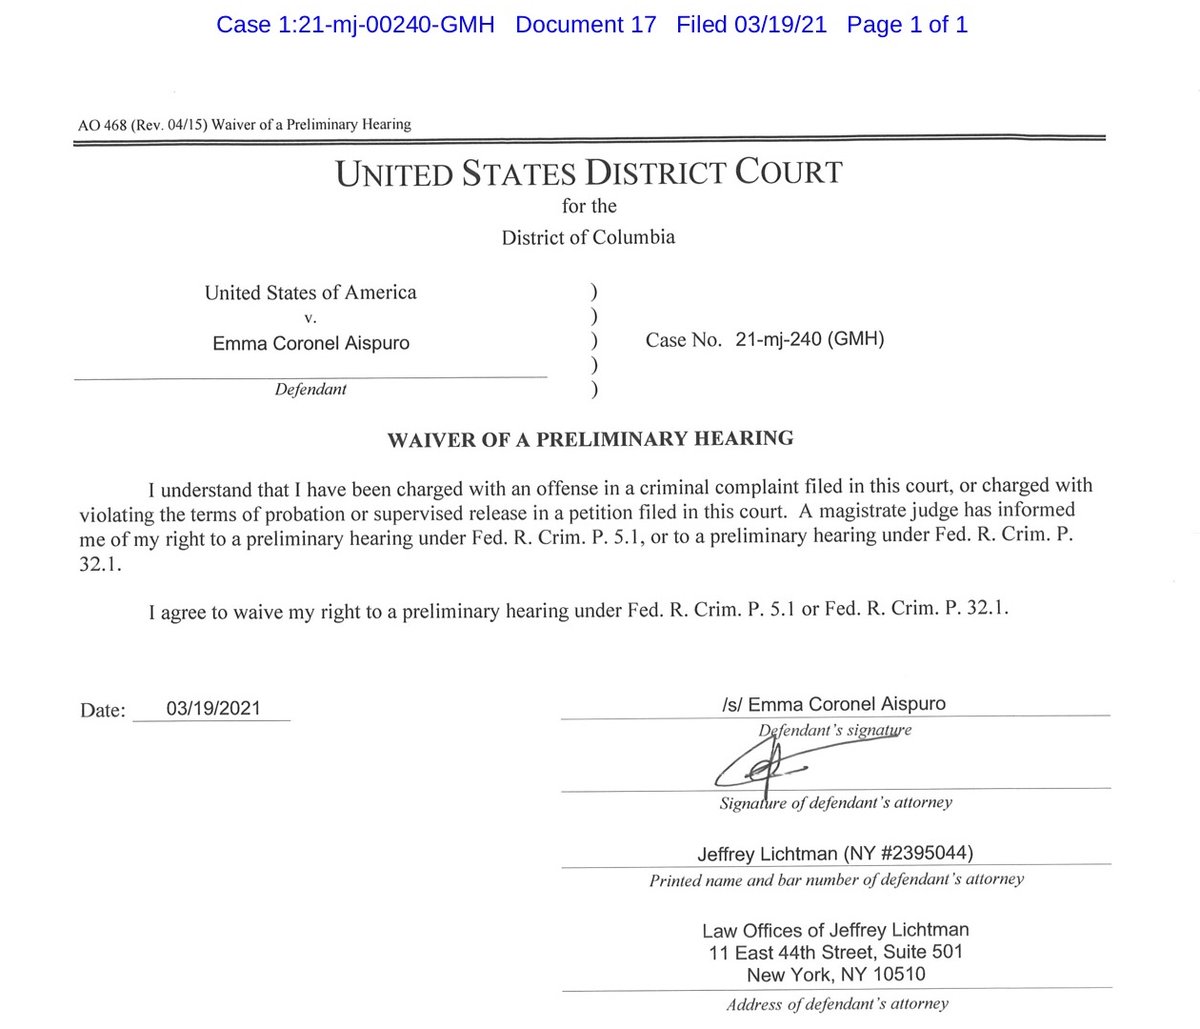 Update on Emma Coronel Aispuro, wife of El Chapo:

Just filed in Washington, DC federal court — she waives her right to a preliminary hearing, still has not entered a plea to the charges against her. https://t.co/dqnCnmnTHh